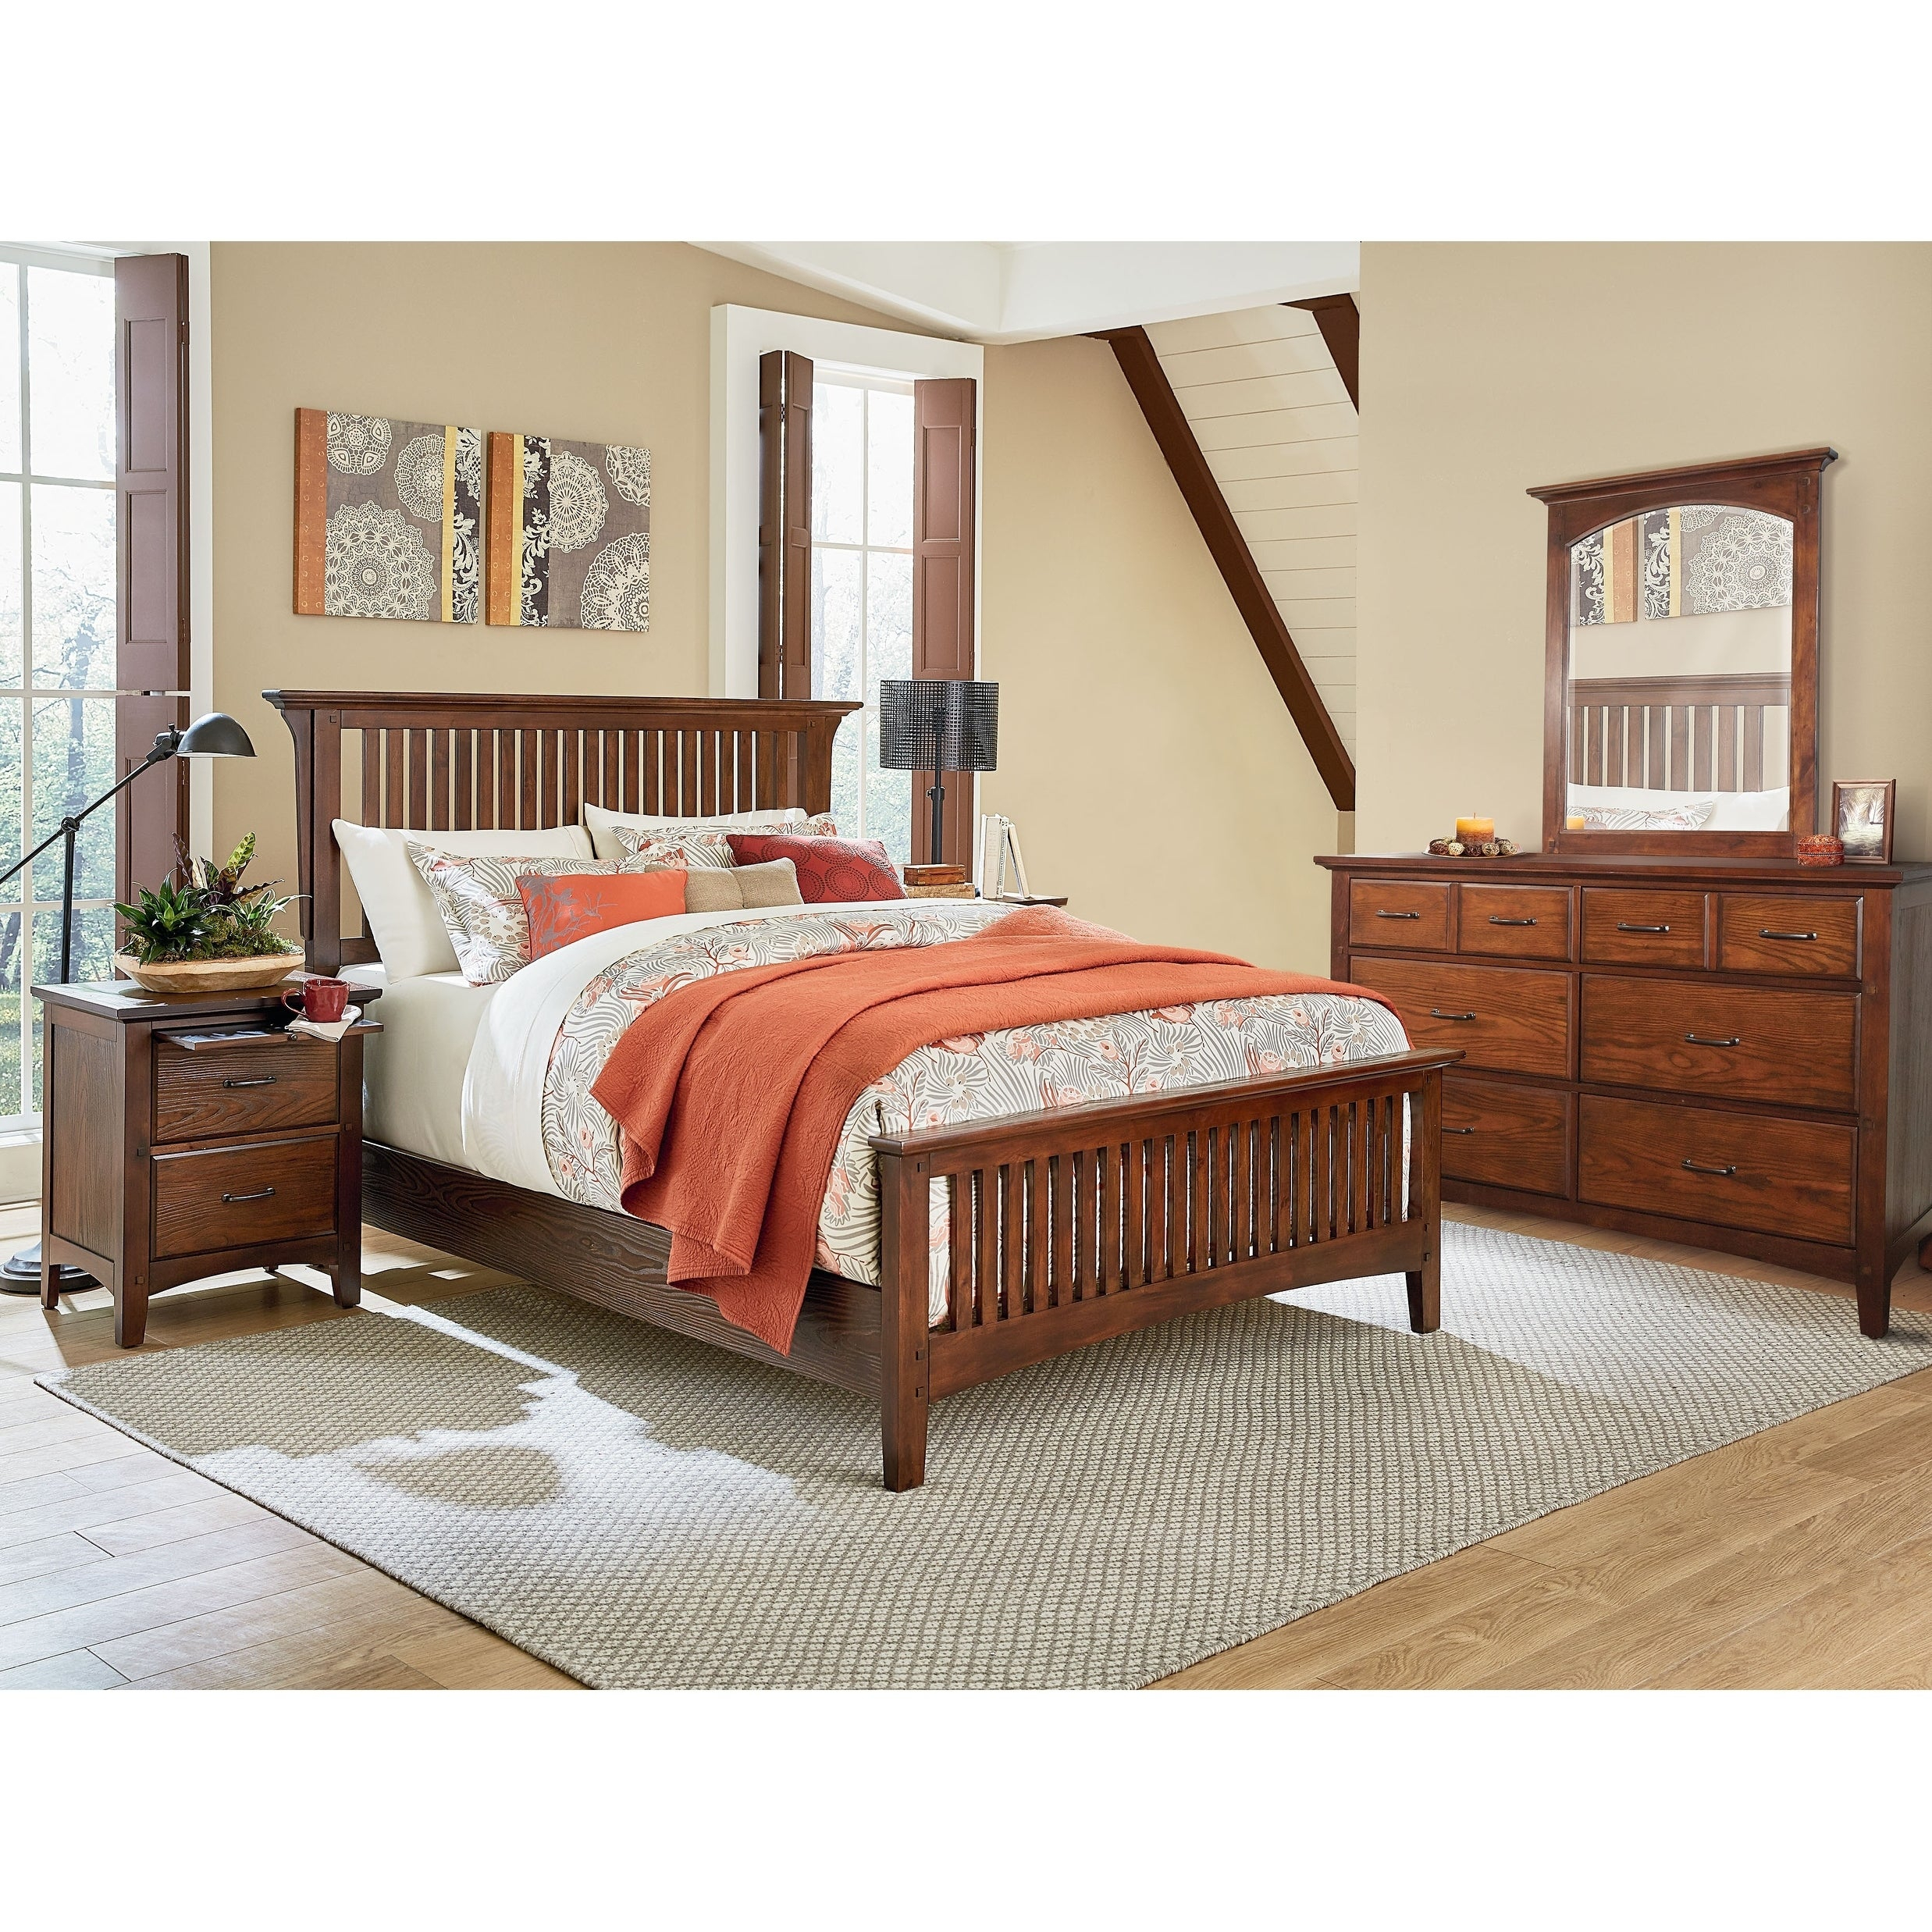 Osp Home Furnishings Modern Mission Queen Bedroom Set With 2 Nightstands And 1 Dresser With Mirror regarding sizing 2475 X 2475